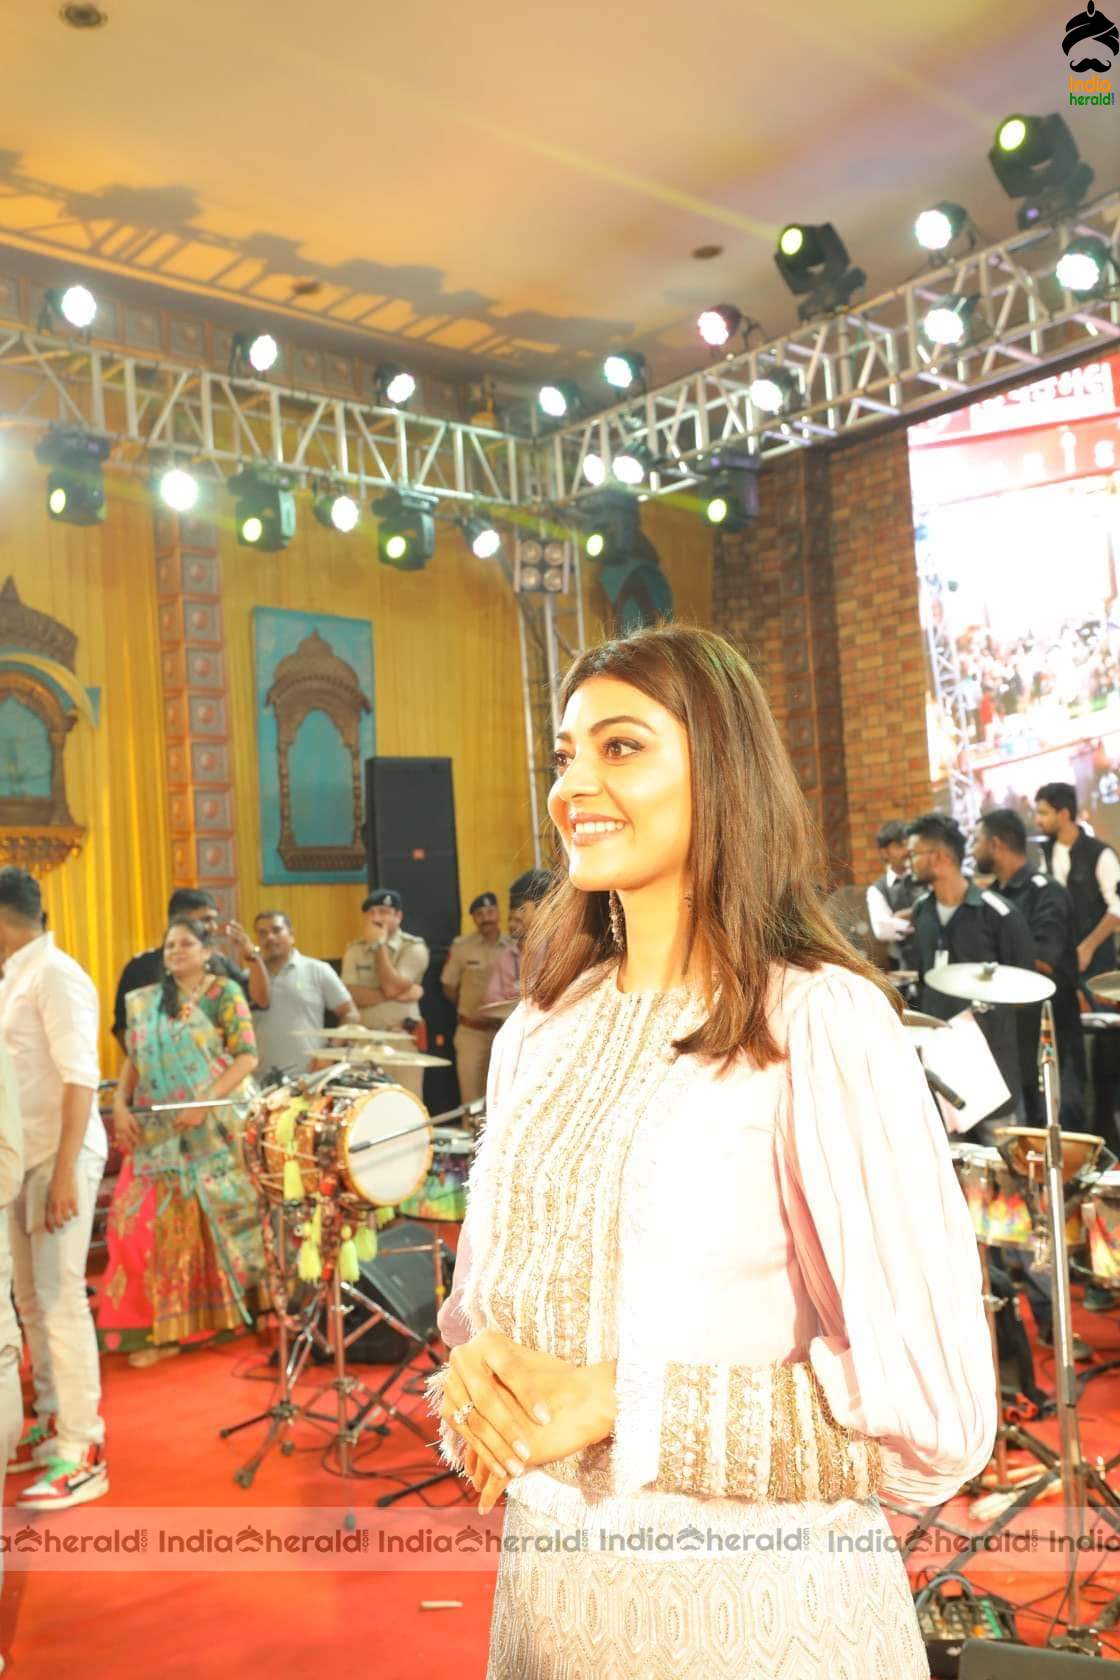 Kajal Aggarwal Surprise Visit at a Live Concert Show Event in Mumbai Set 1